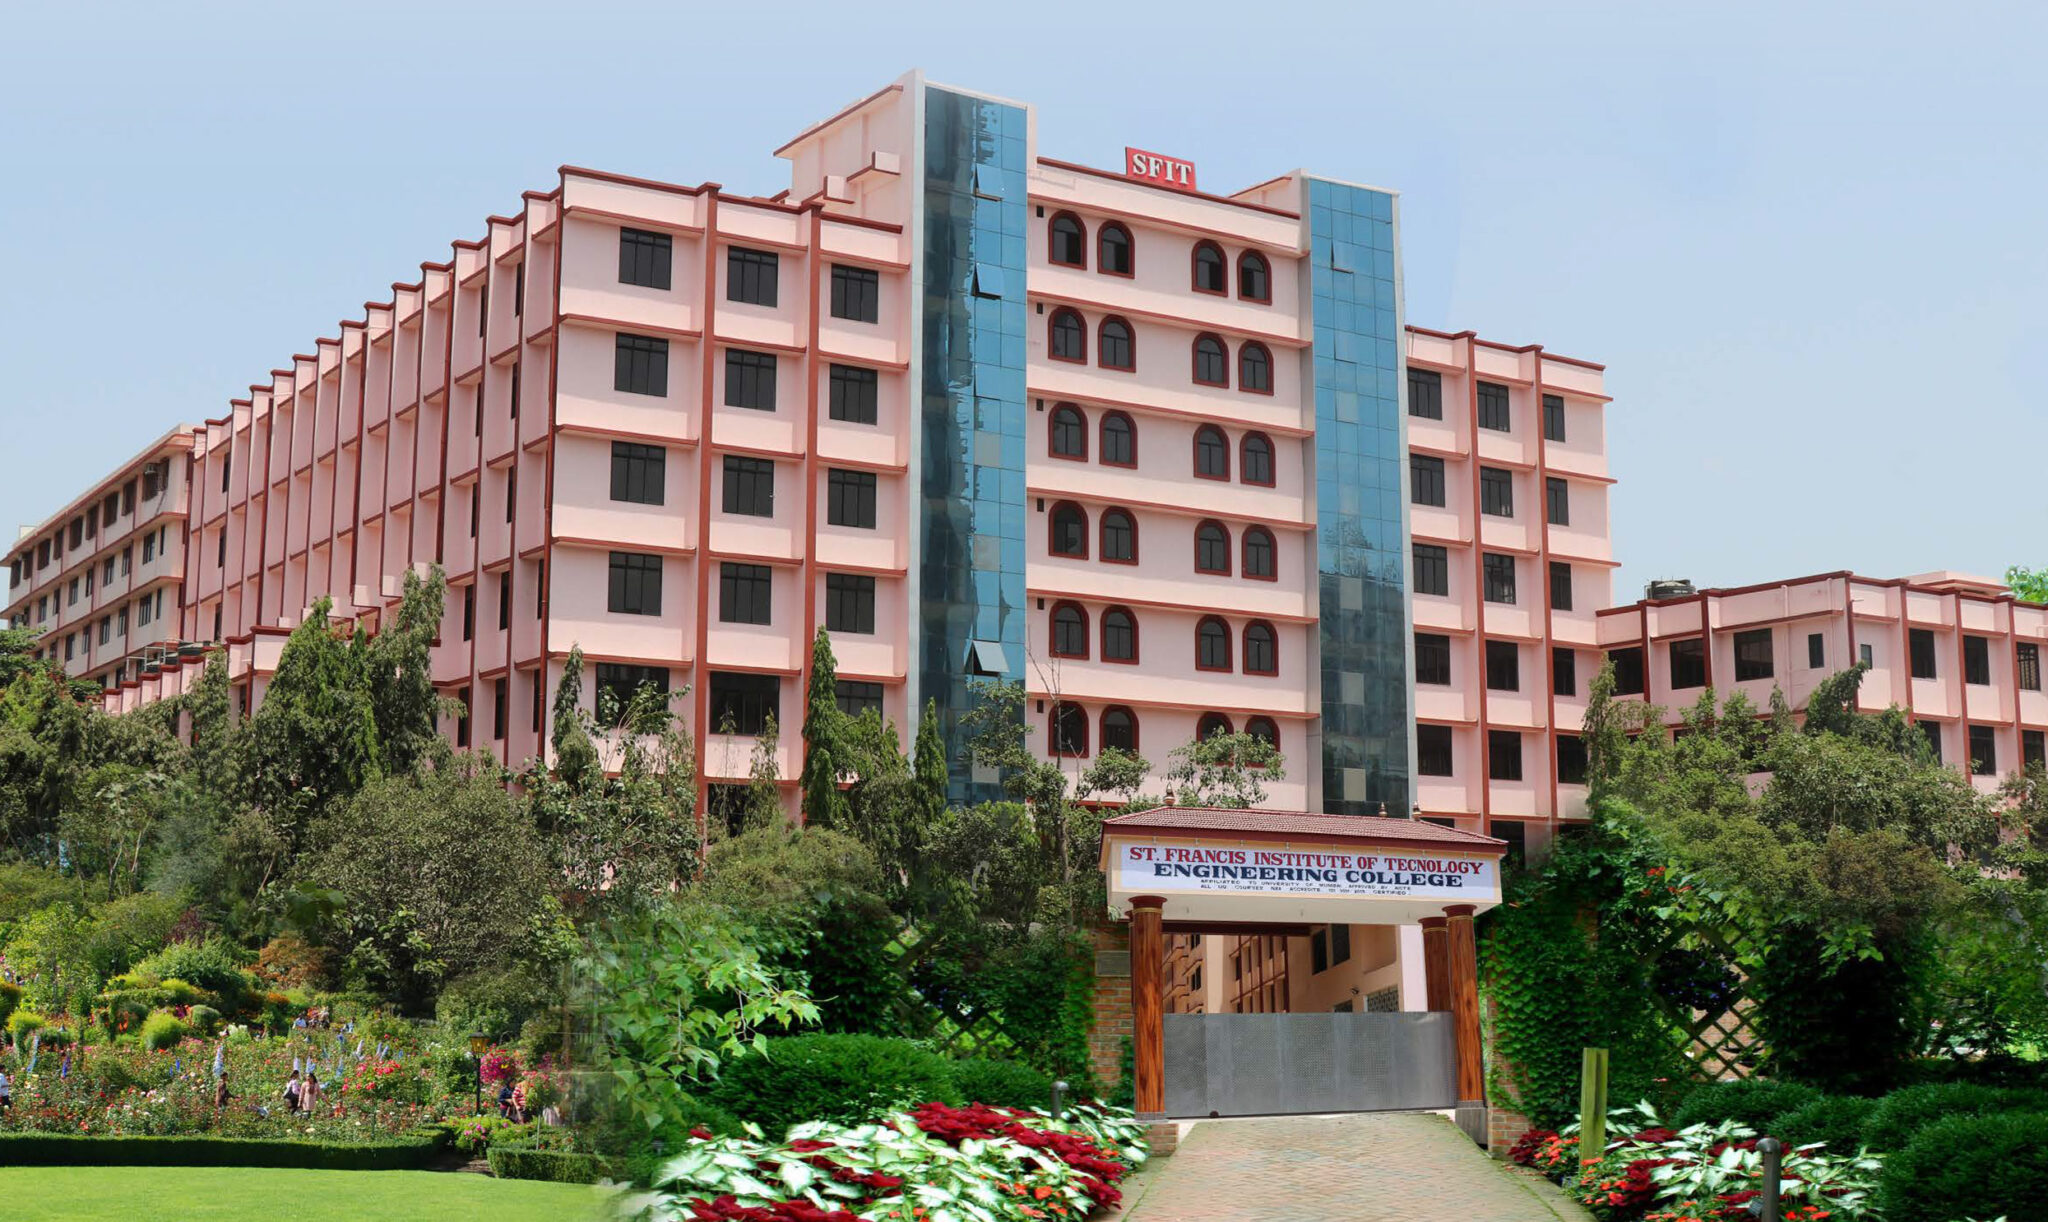 St. Francis Institute of Technology